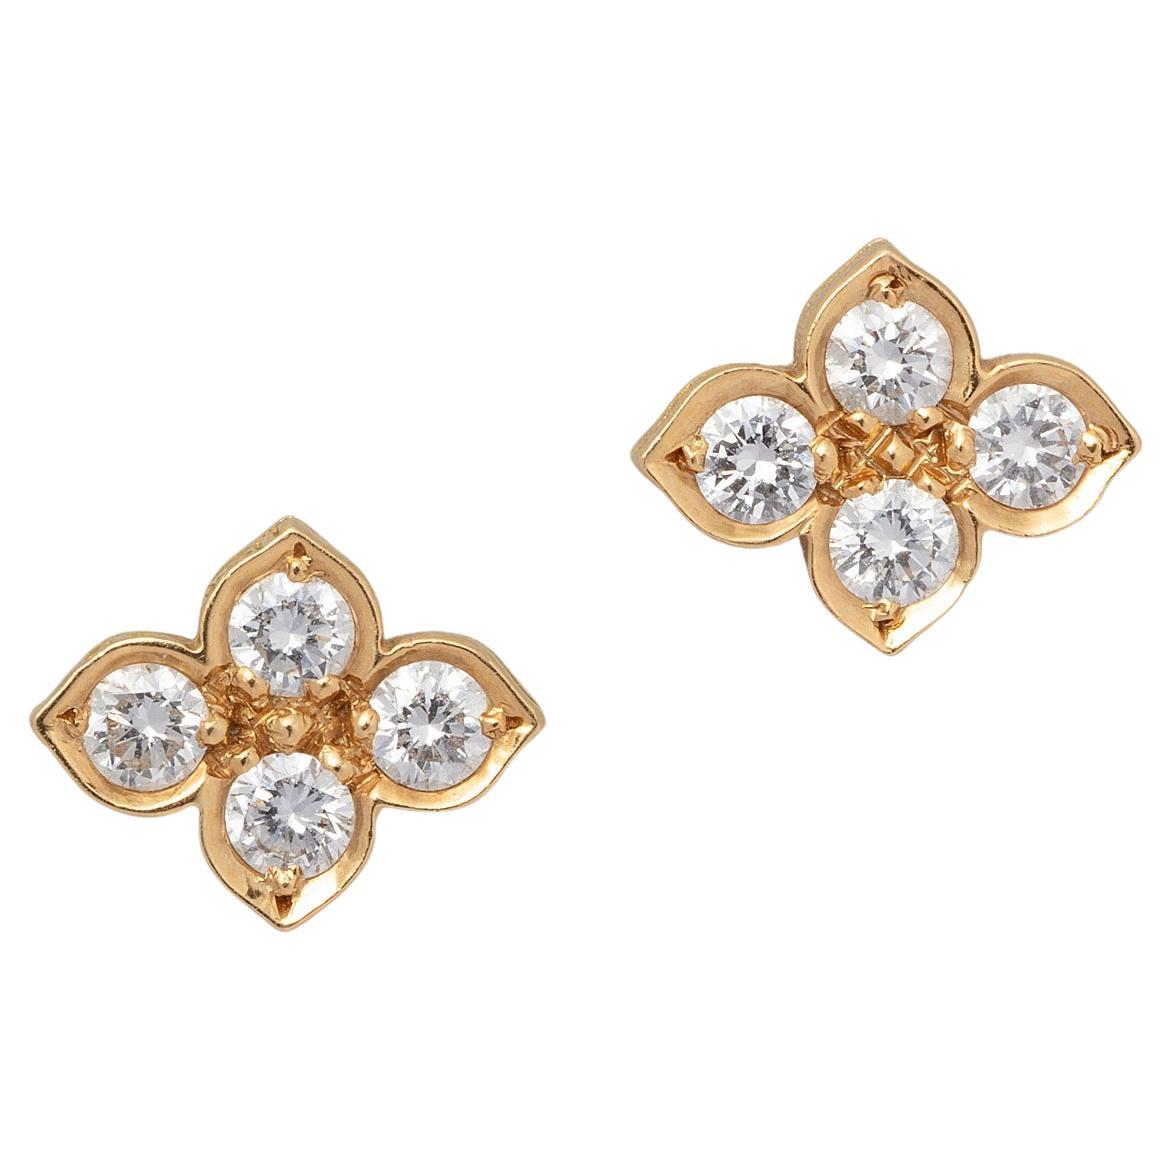 A Pair of 18 Carat Gold and Diamond Cartier Flower Stud Earrings